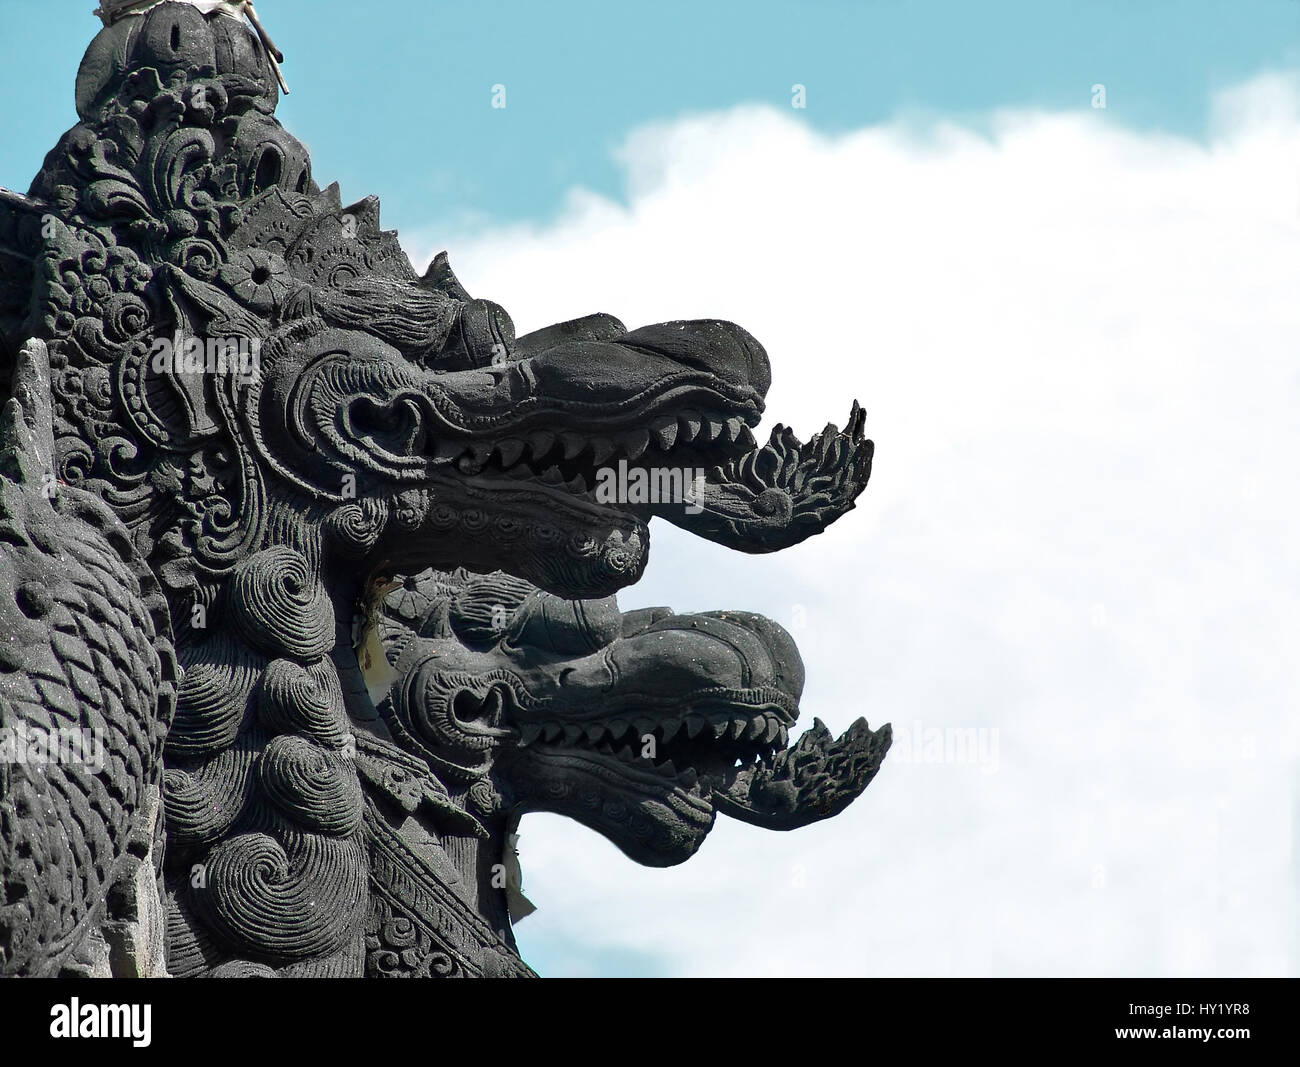 Image of ancient dragon statues at the Tanah Lot Temple in Bali, Indonesia. Stock Photo